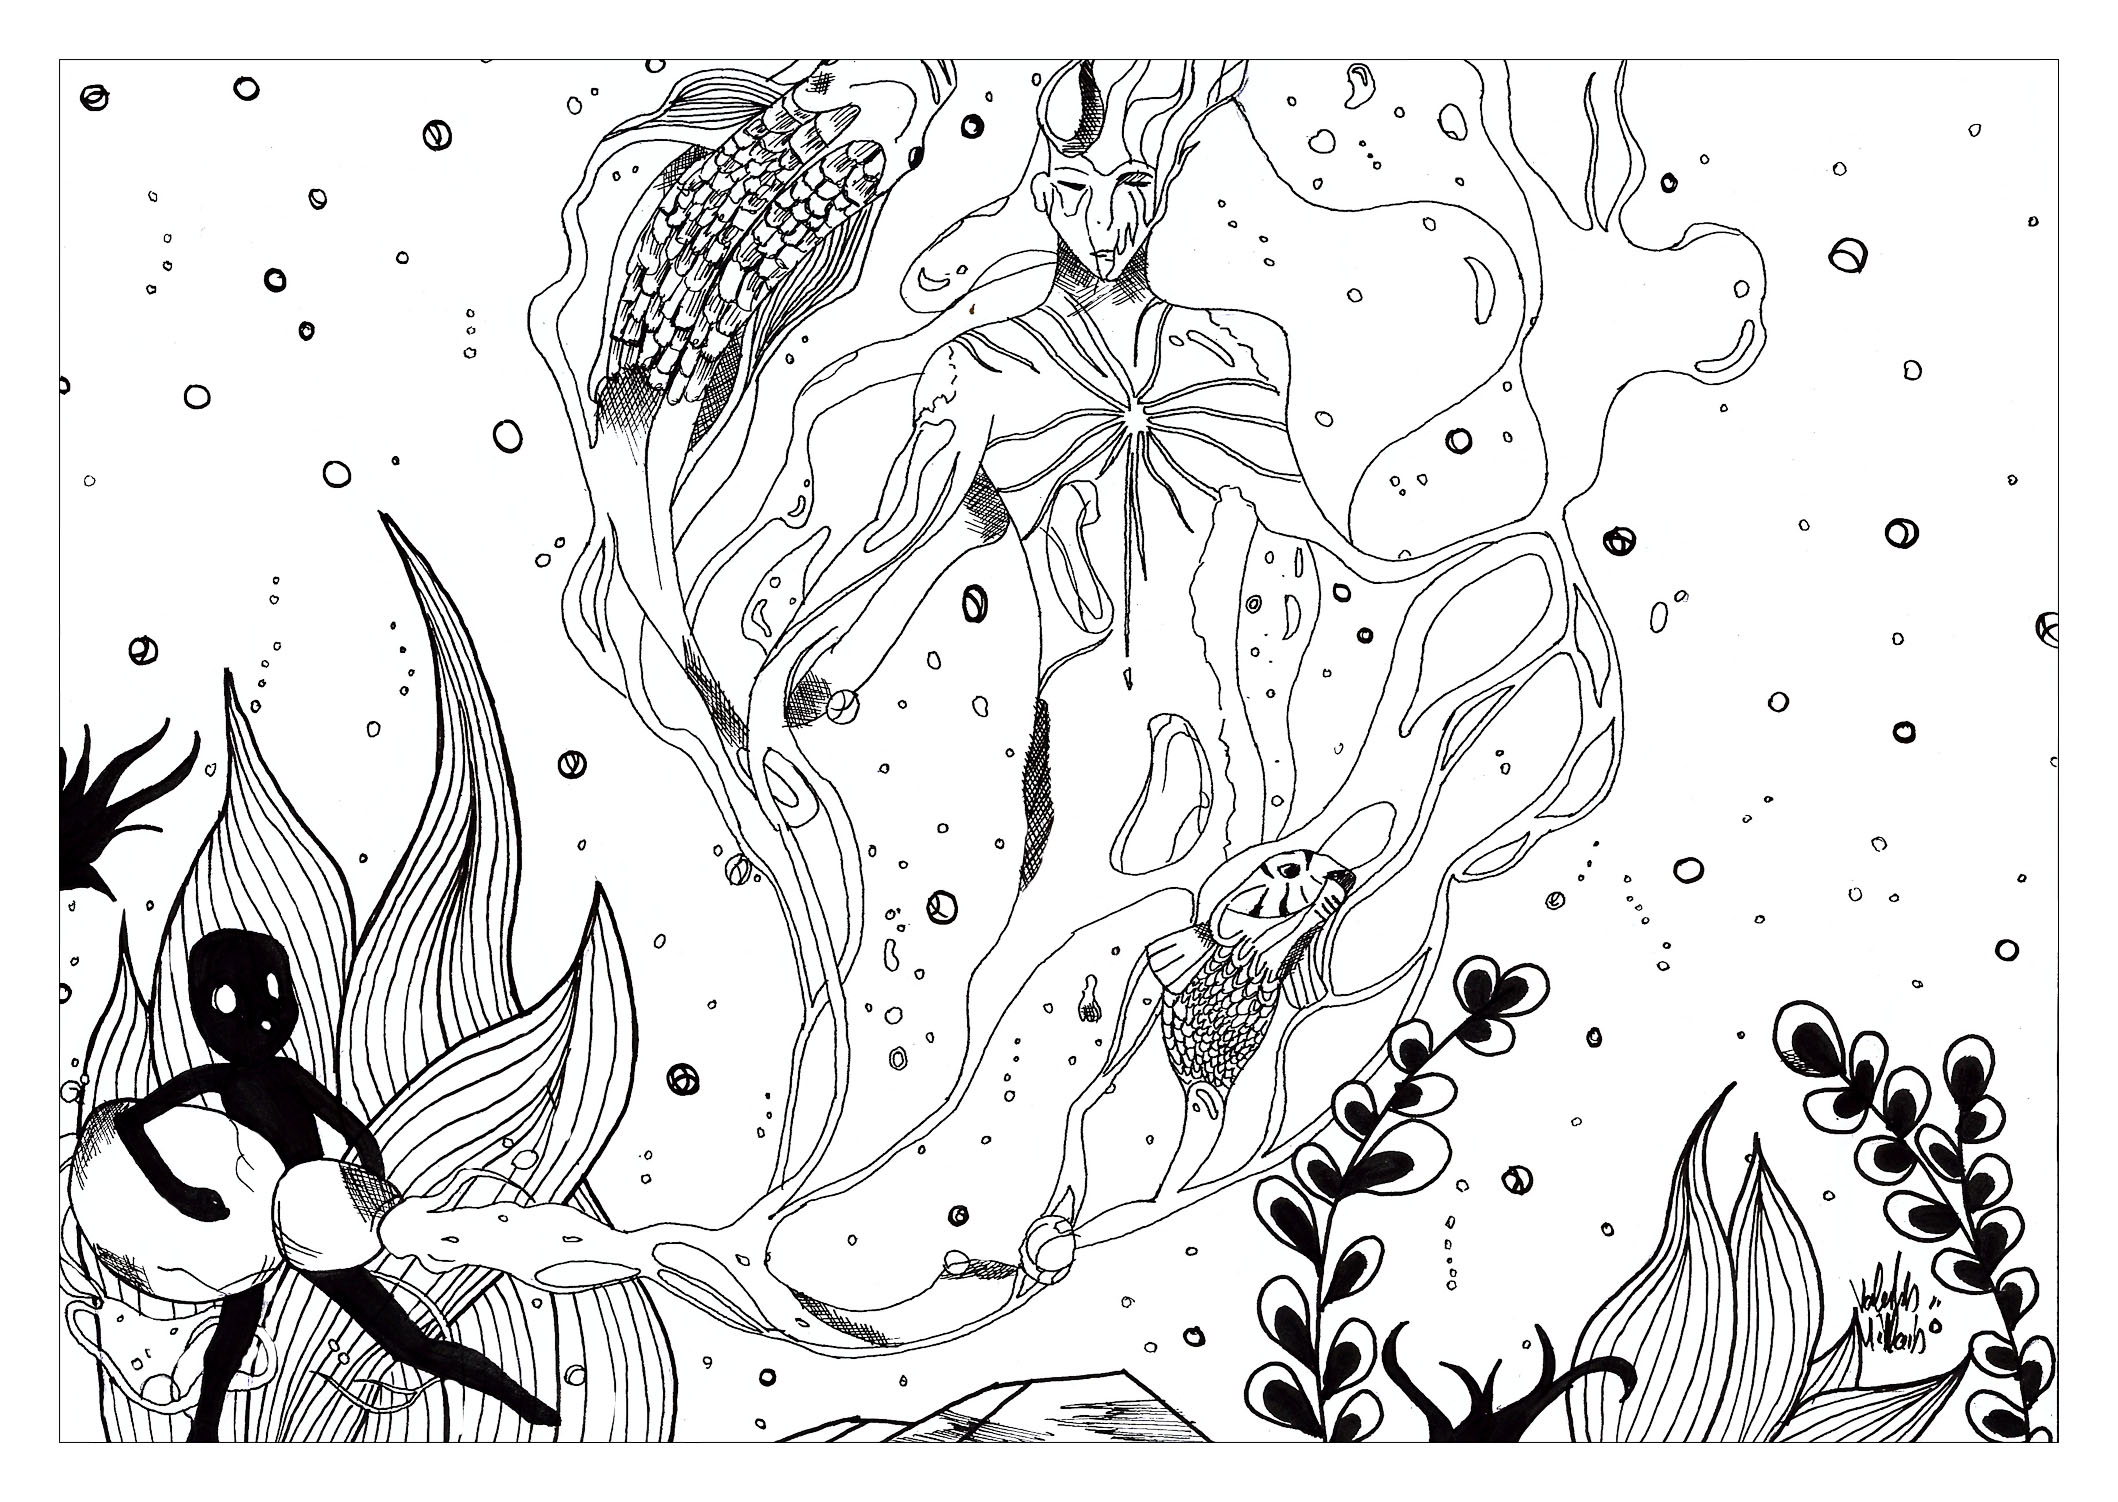 Coloring page of the Aquarius